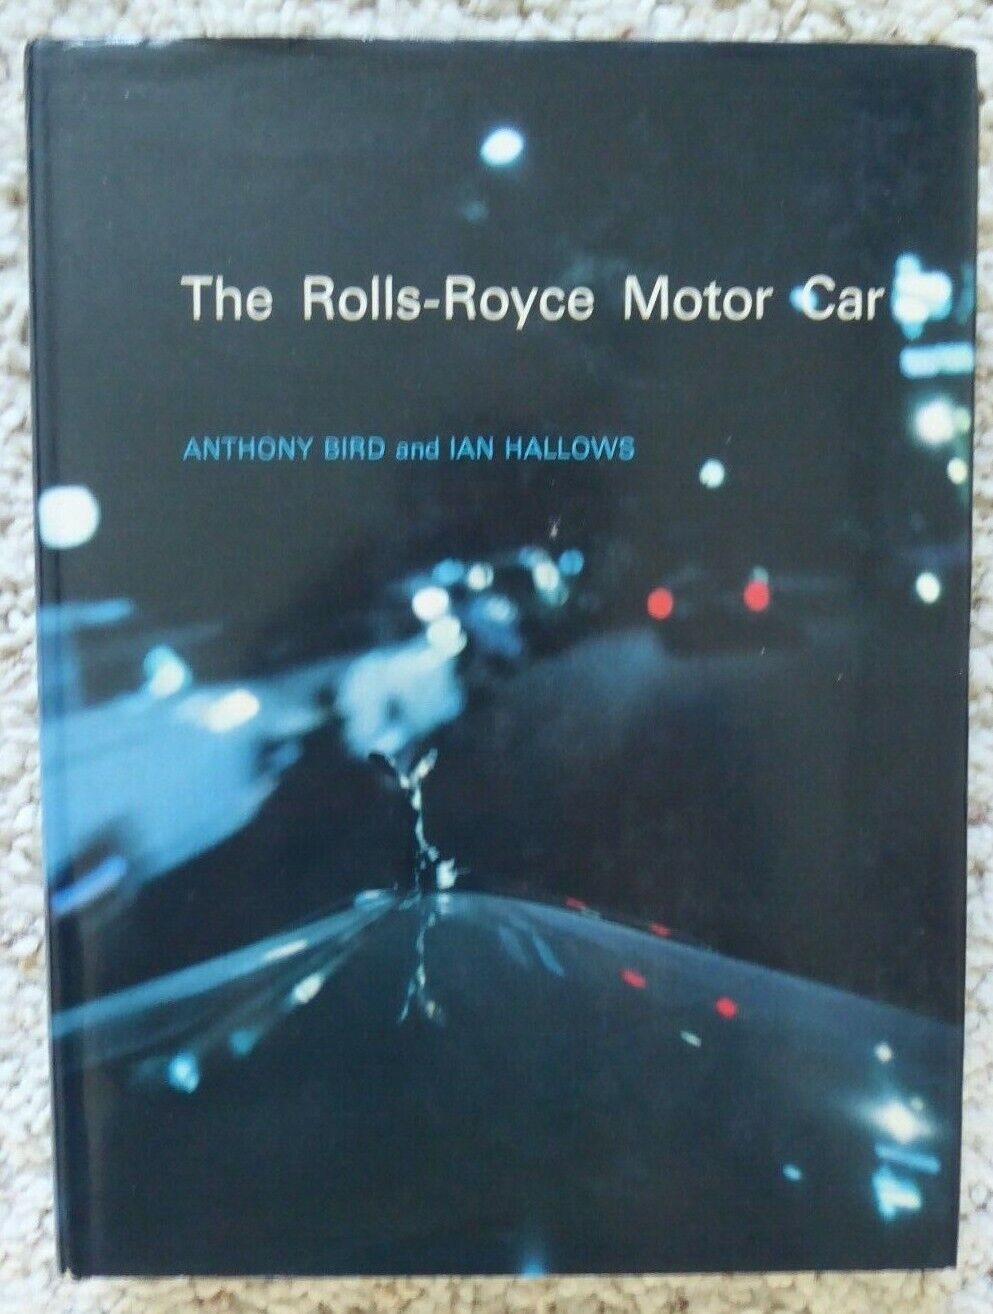 The Rolls-royce Motor-car And The Bentleys Built By Rolls-royces By Anthony Bird